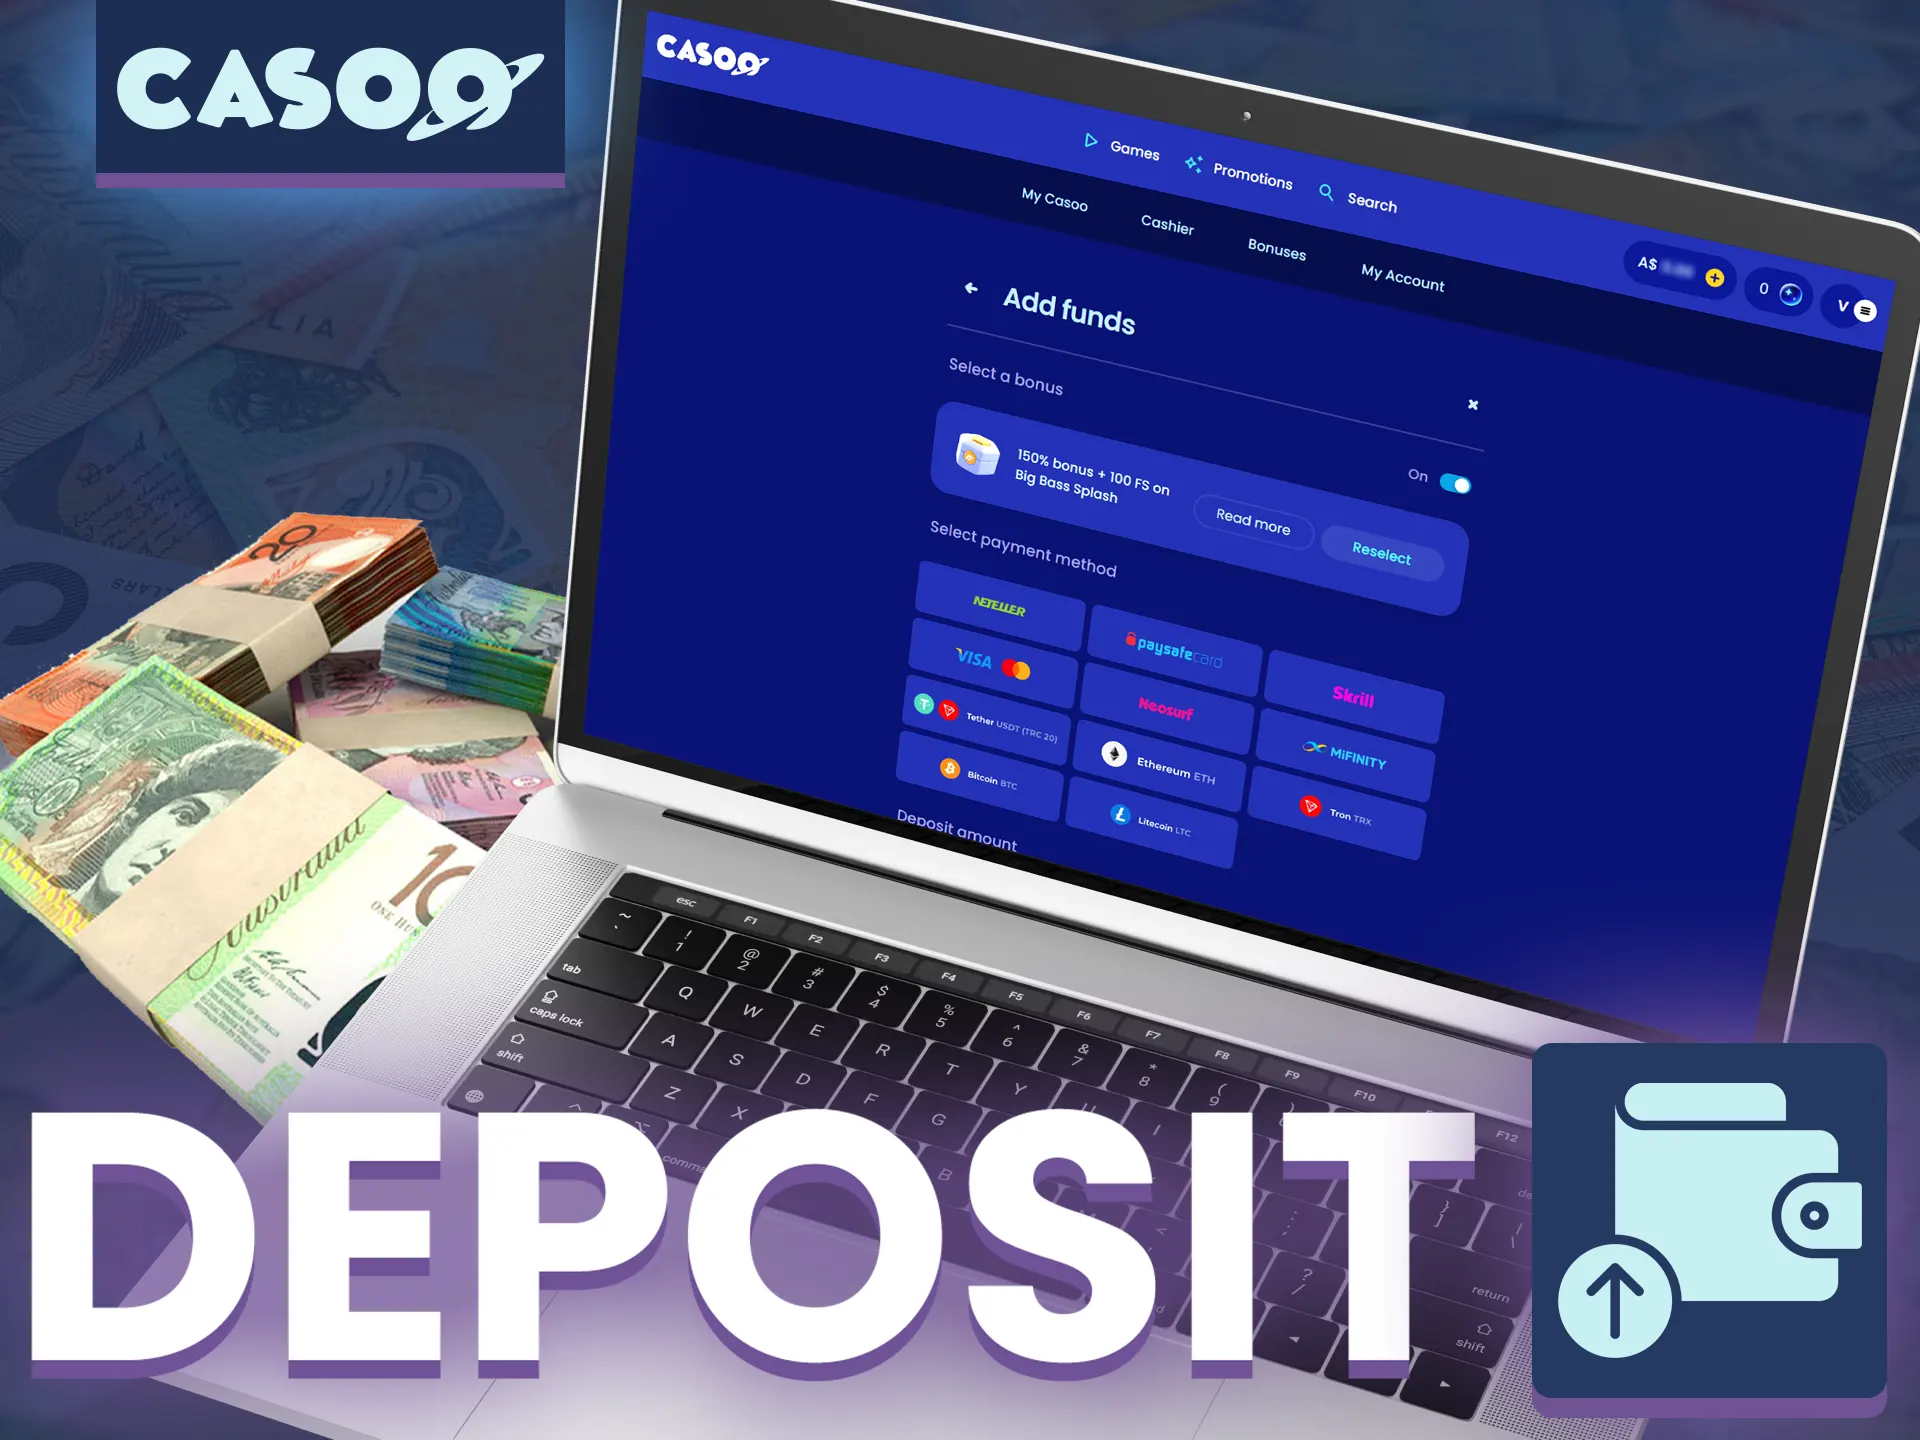 Use the instructions to make your first deposit at Casoo.